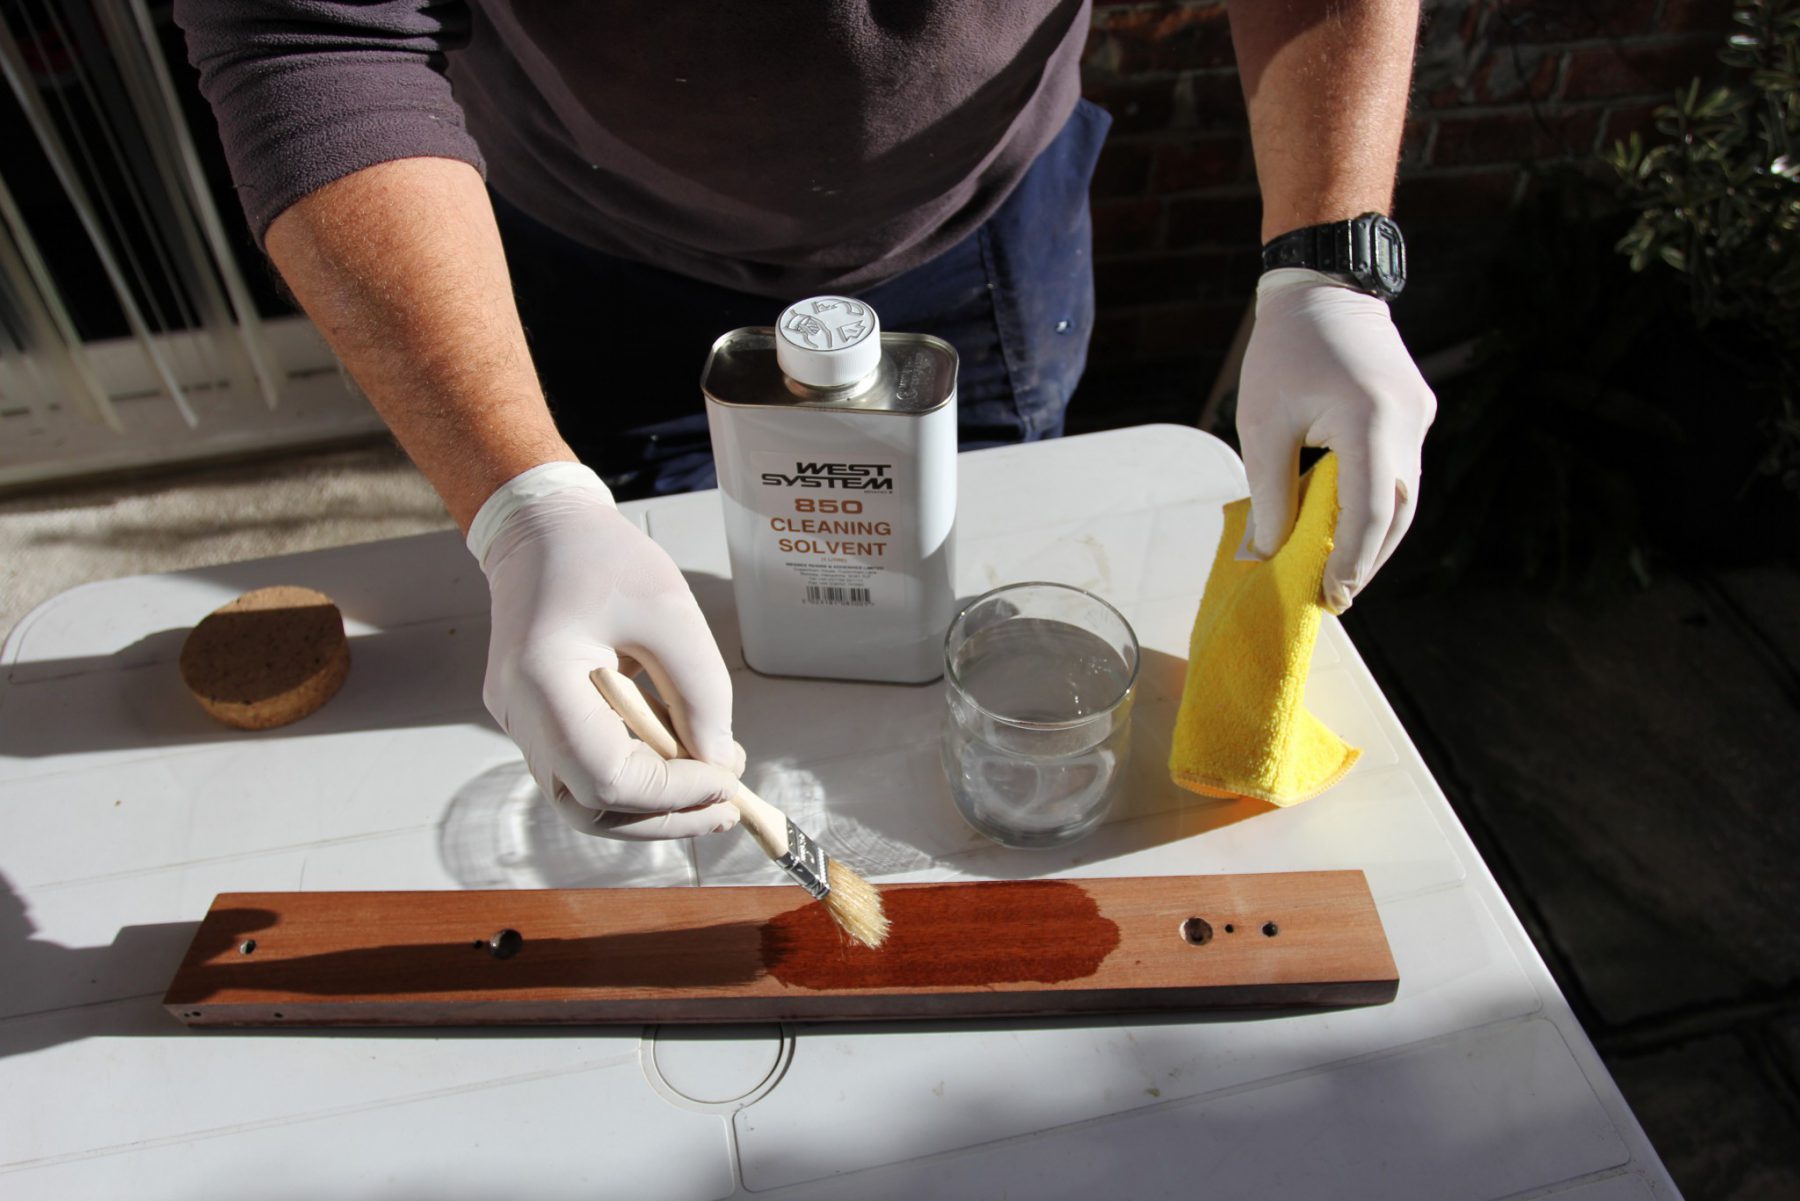 Come and see our ‘how to use epoxy’ demonstrations, at the RYA Dinghy Show 